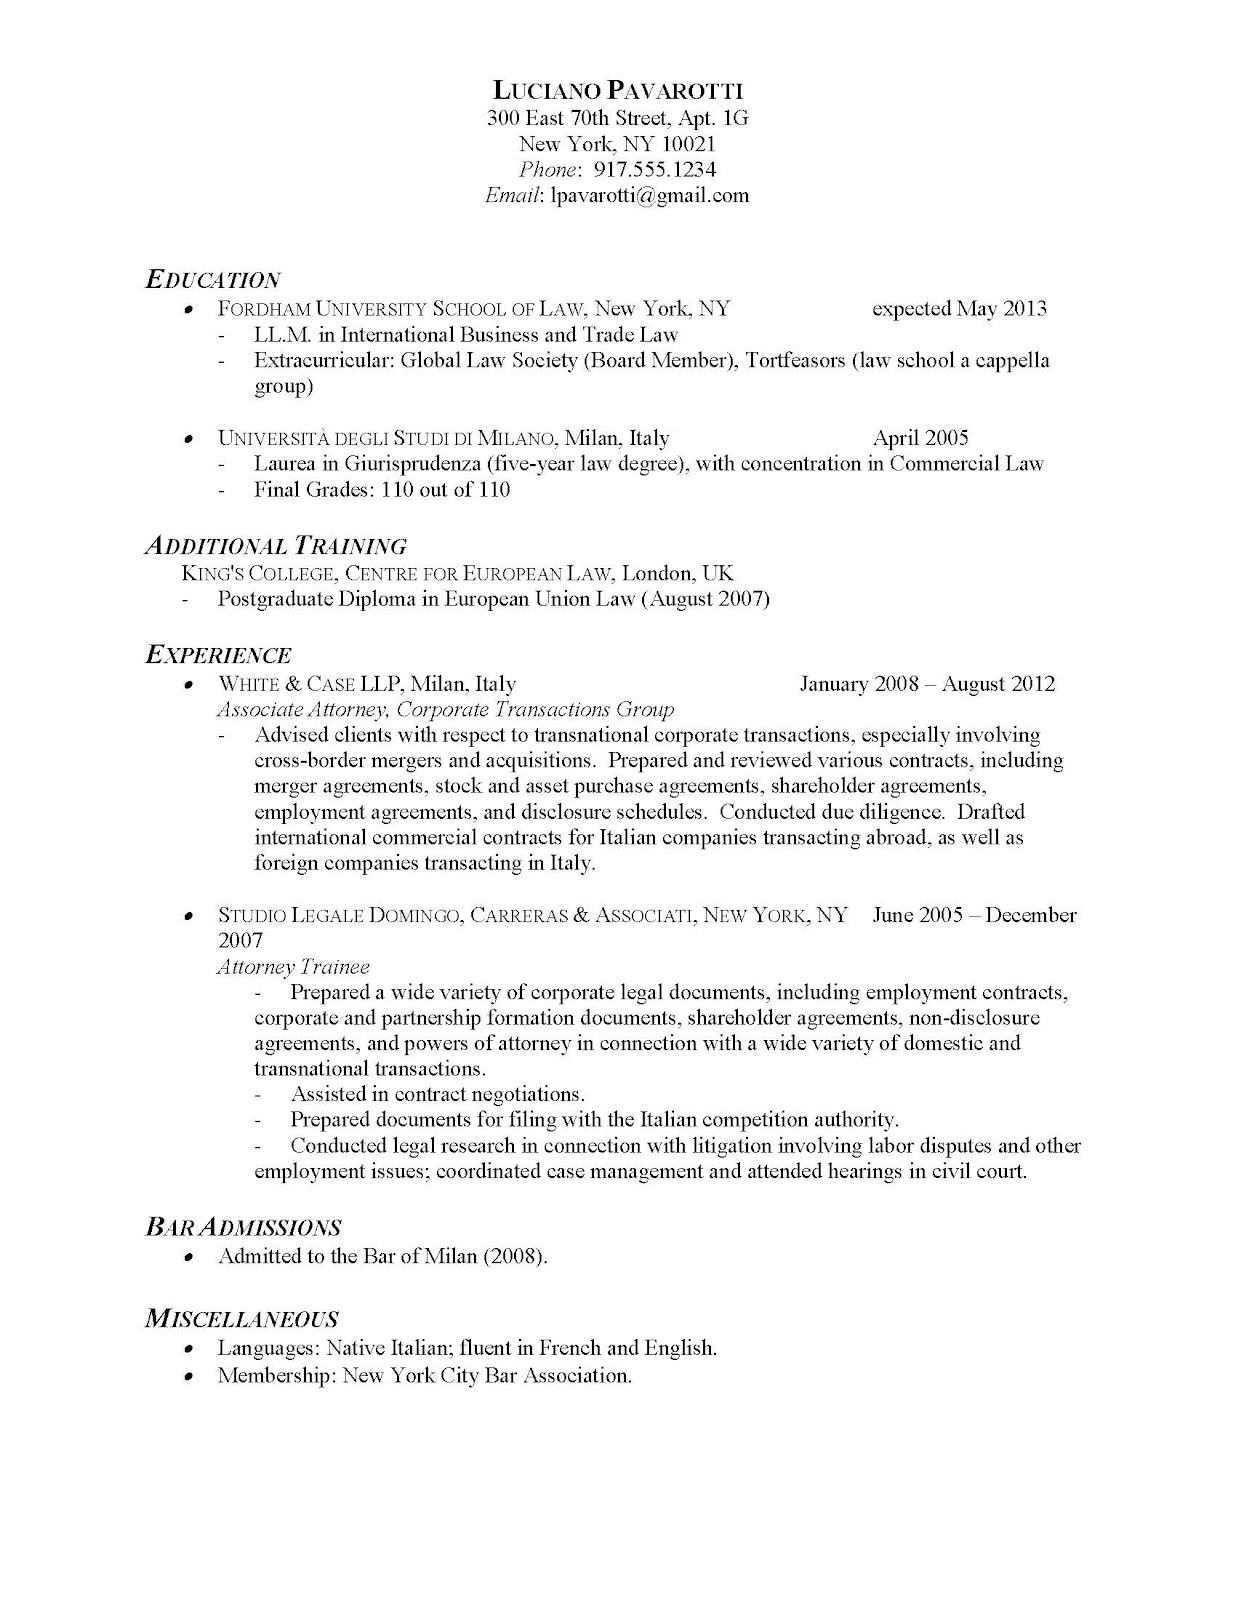 Resume out of work over year